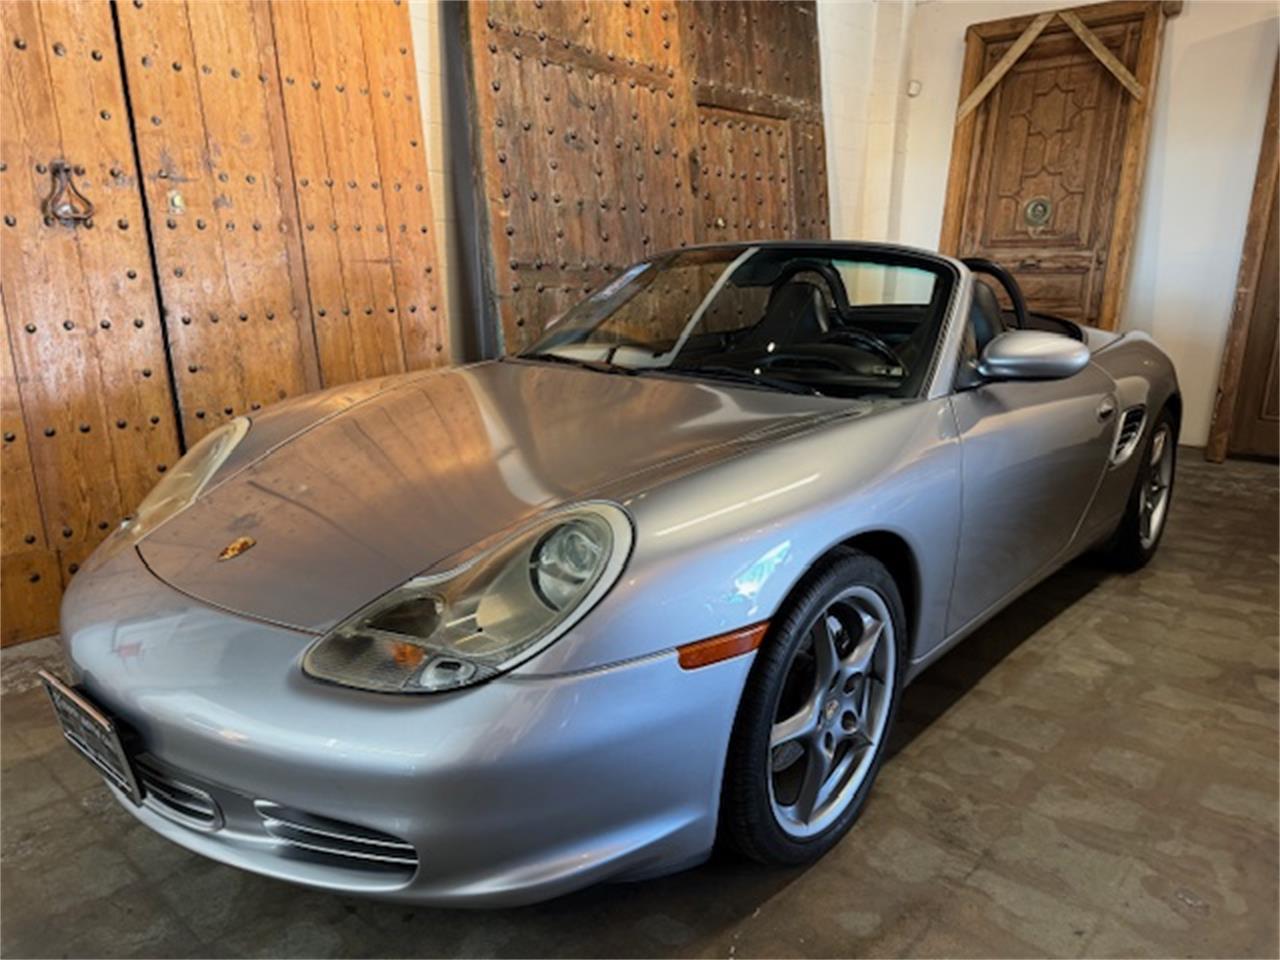 For Sale at Auction: 2004 Porsche Boxster in Palm Springs, California for sale in Palm Springs, CA